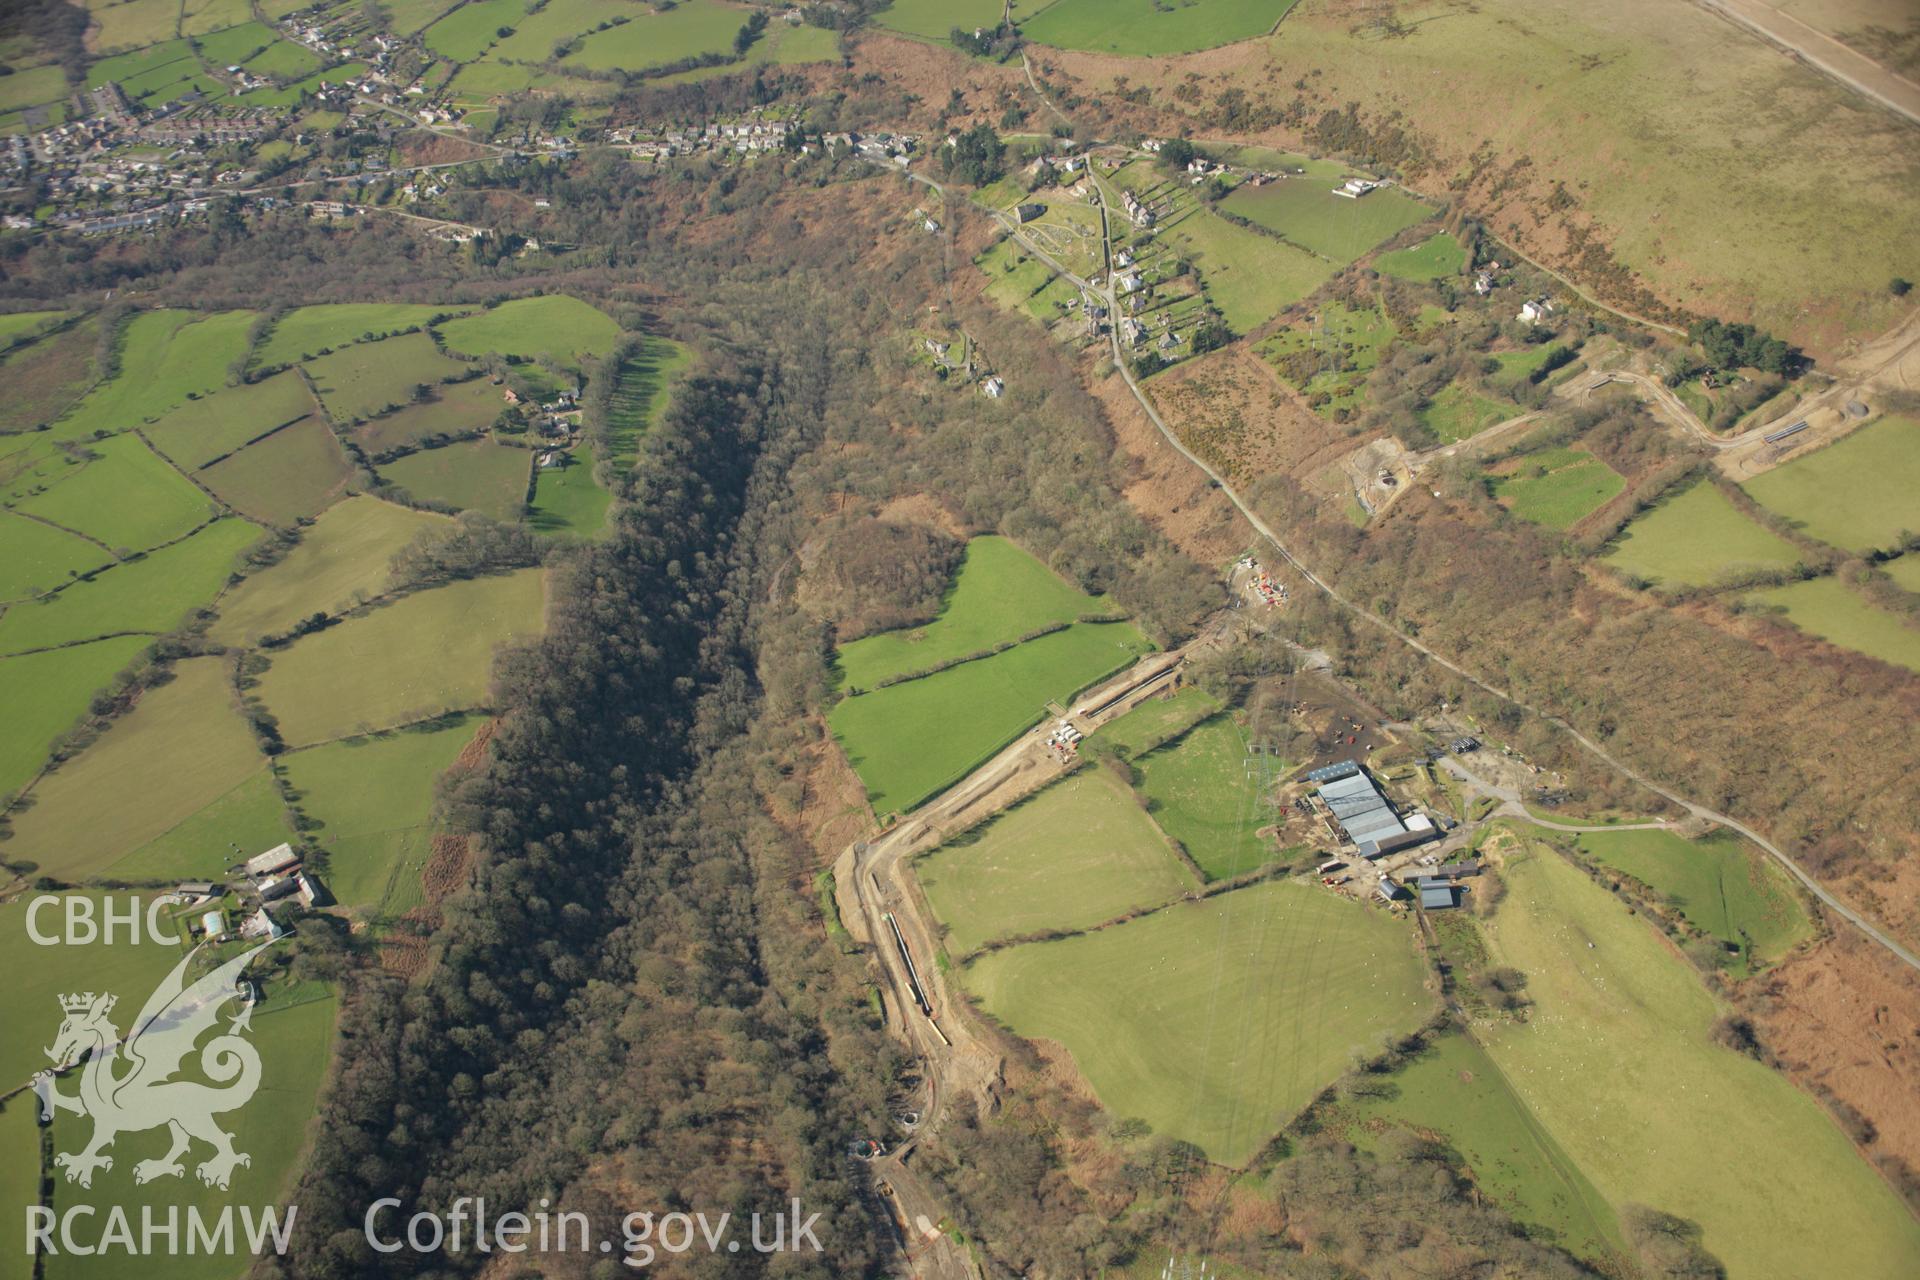 RCAHMW colour oblique aerial photograph of Pantycrwys Independent Chapel, Rhyd Ty Gwin, Craig-Cefn-Parc in landscape view showing LNG pipeline. Taken on 21 March 2007 by Toby Driver